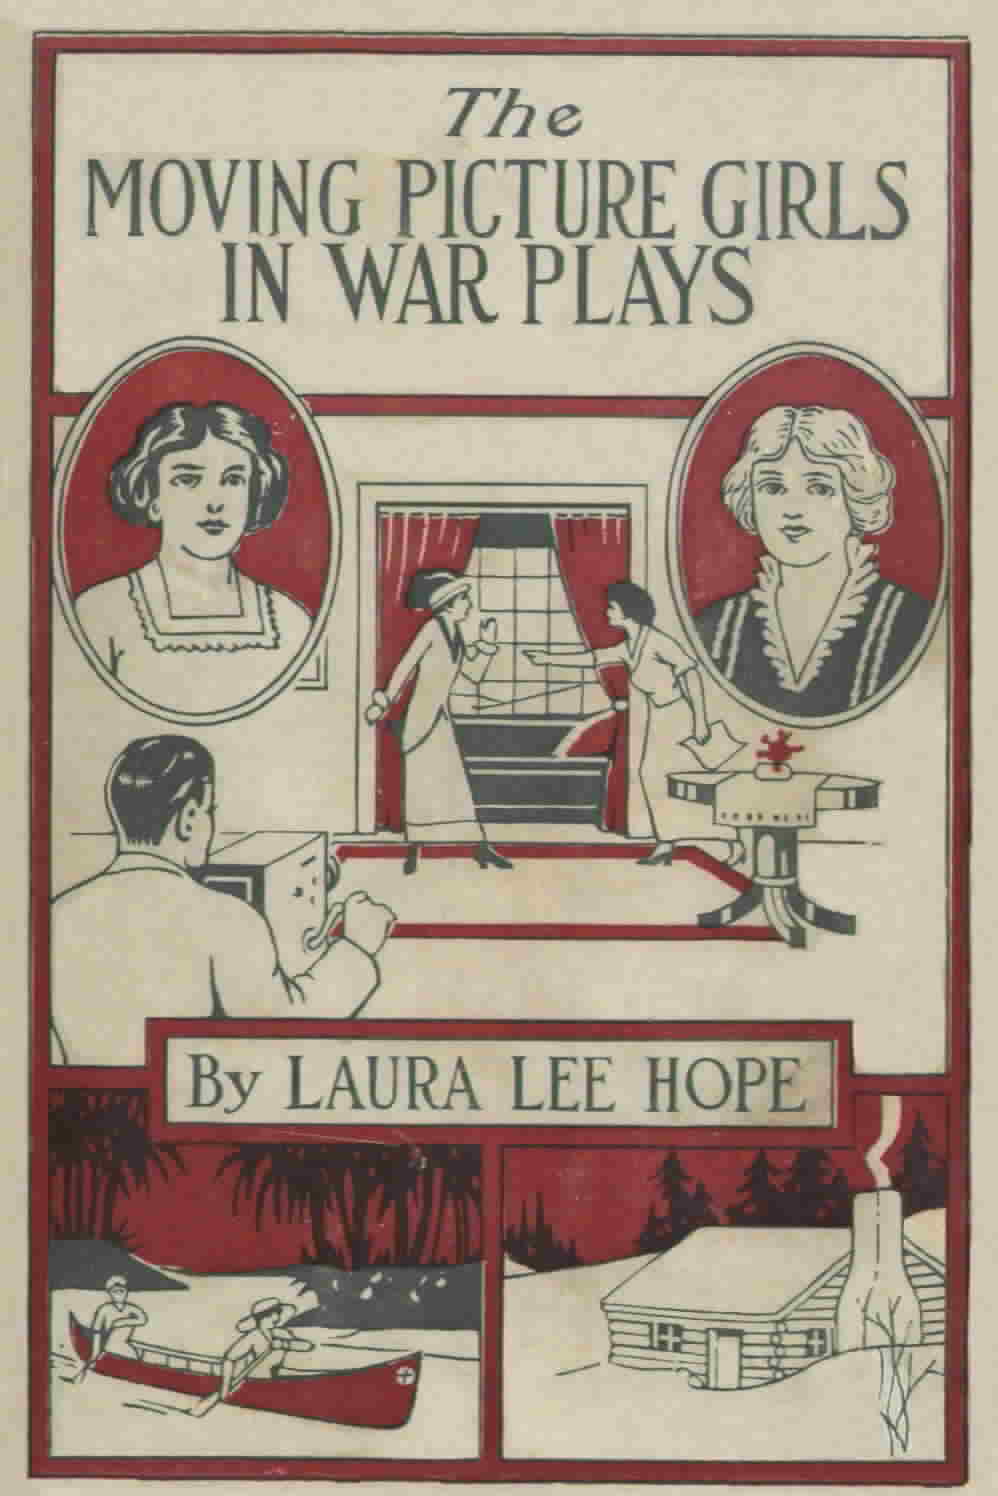 7. The Moving Picture Girls in War Plays